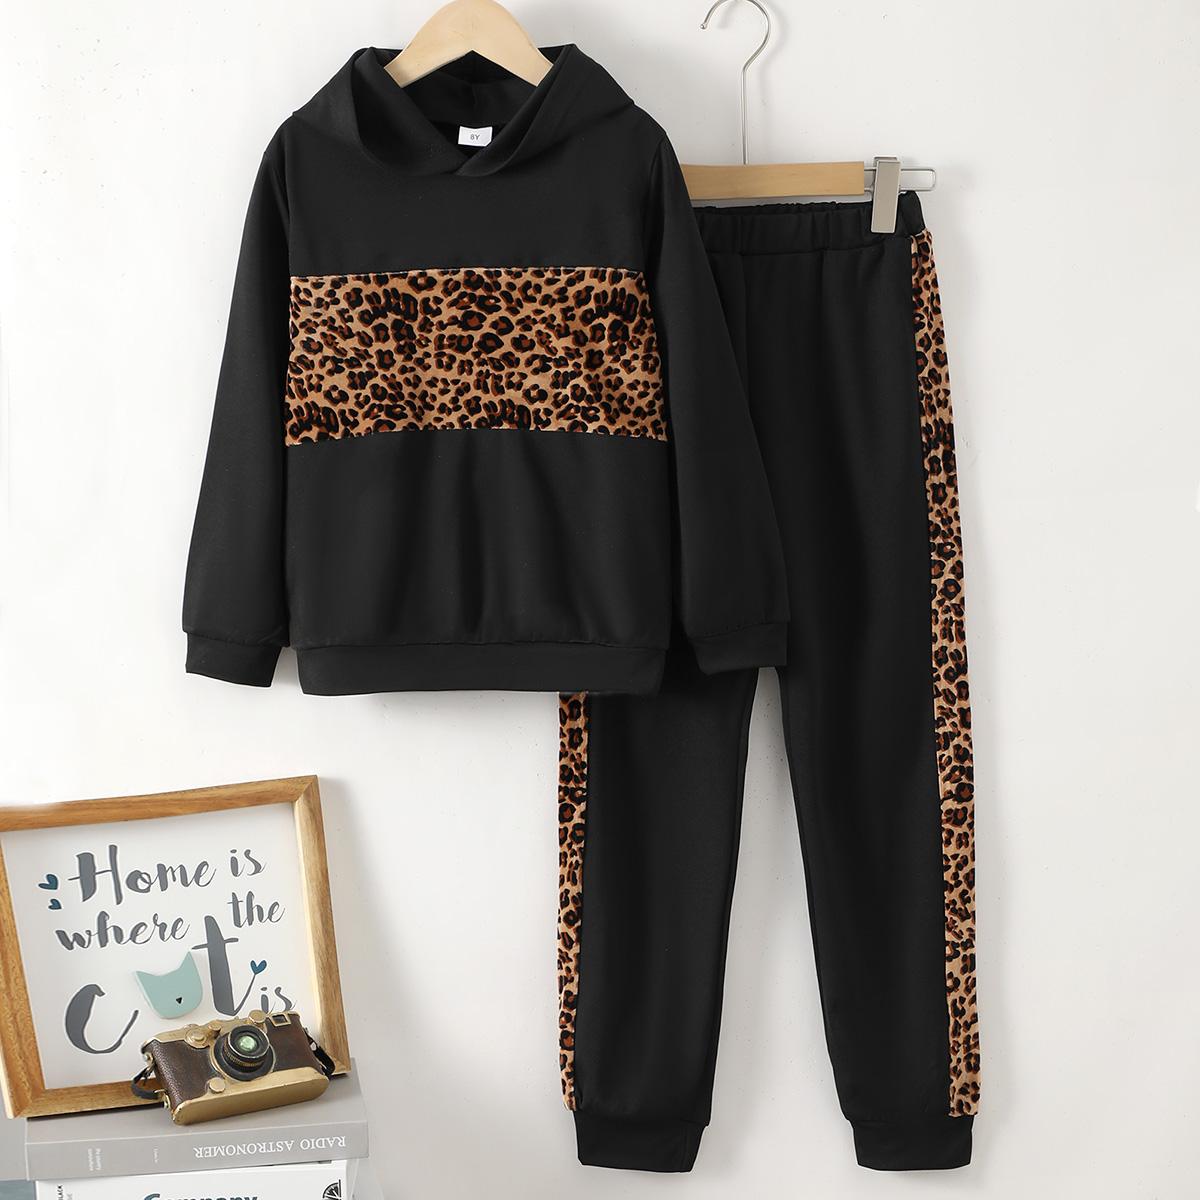 8-14Y Ready Stock 2pcs Girls Chic Clothes Leopard Graphic Hoodie Sweatshirt Top & Casual Side Taping Sweat Pants Trousers Set For Sports Leisure Vacation Outwear Kids Spring Fall Outfit Black Catpapa 462304003